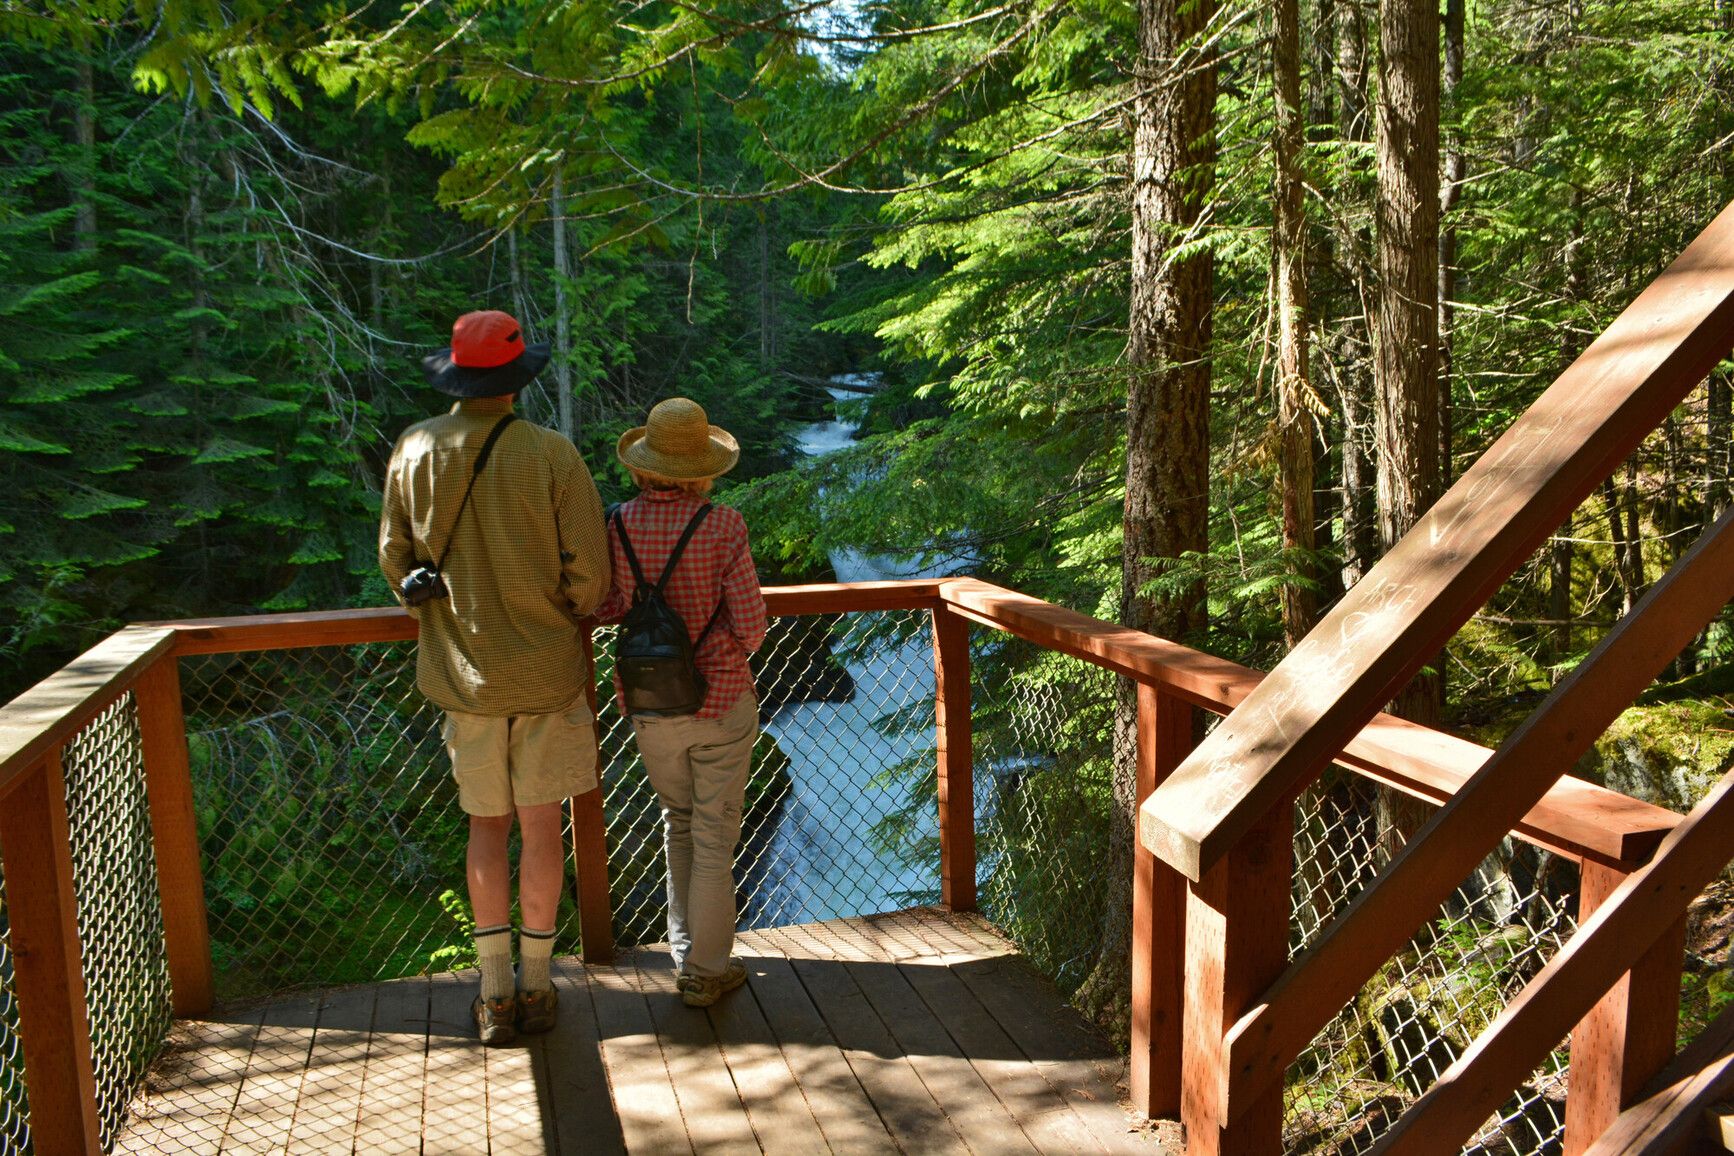 Taking in the serene beauty of Kokanee Creek from a scenic viewing platform along the trail.